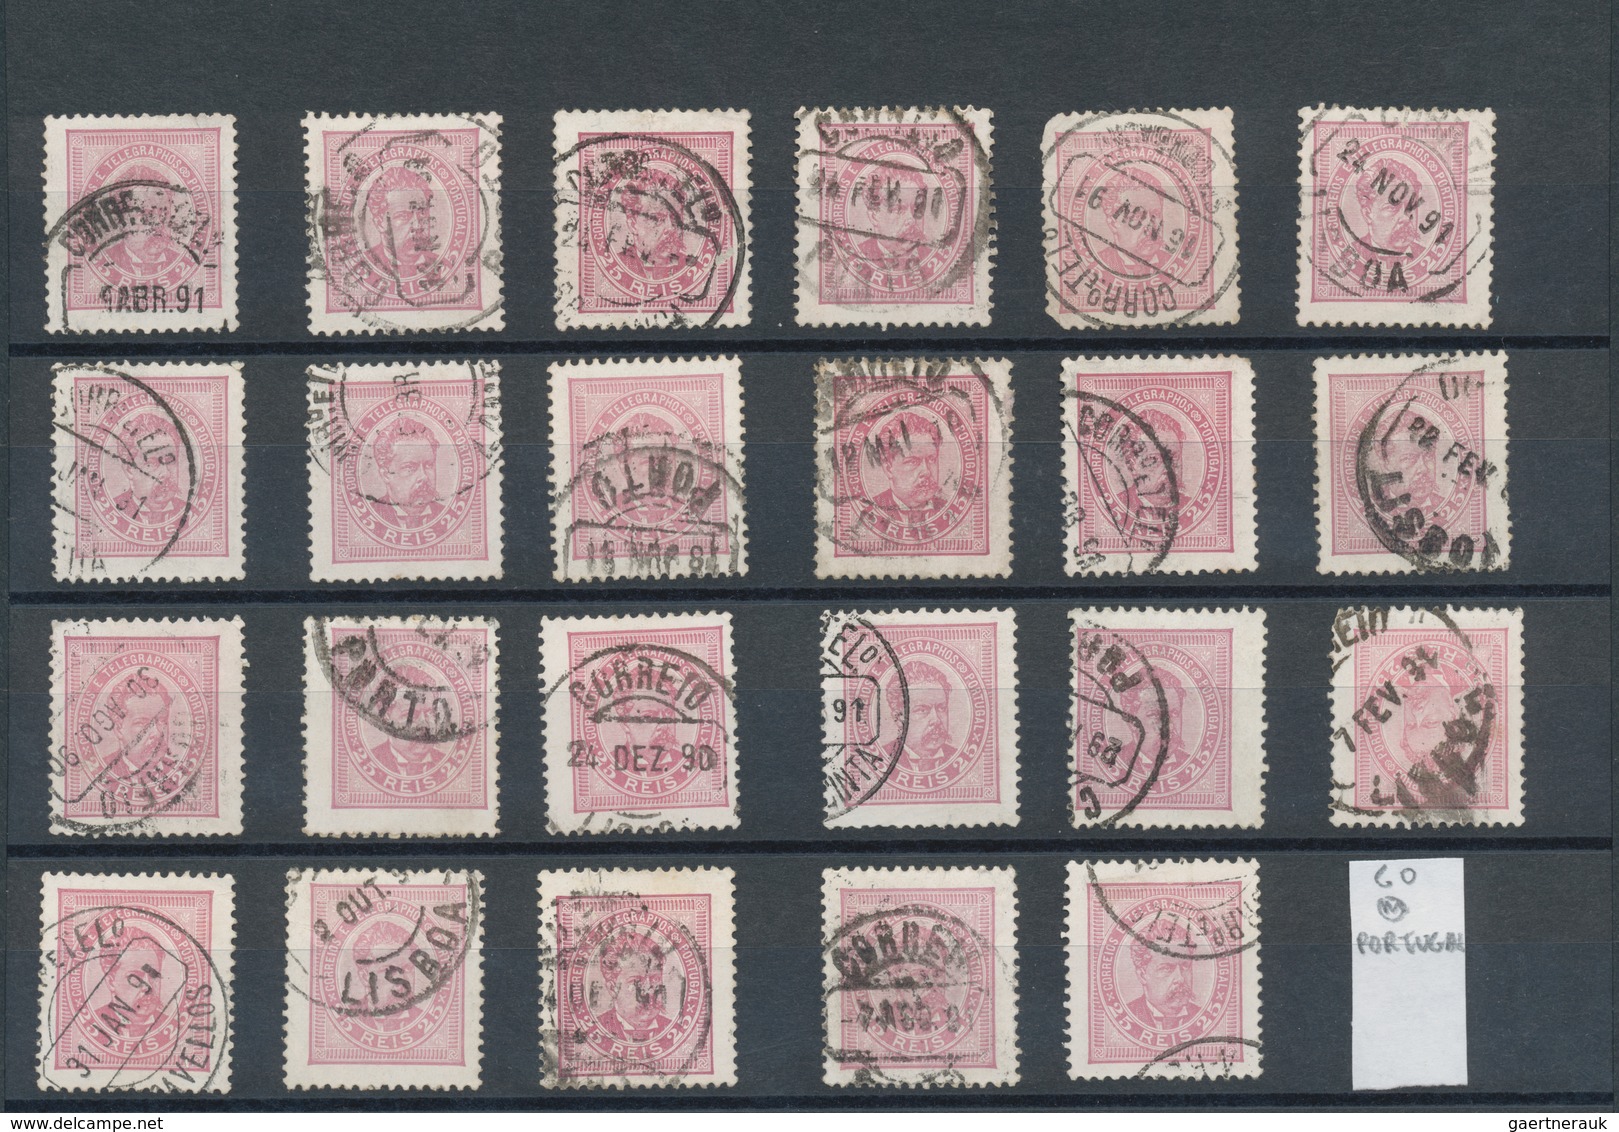 Portugal: 1880/1887, lot ex Mi no. 53/64, in total more than 180 used and 8 unused stamps including